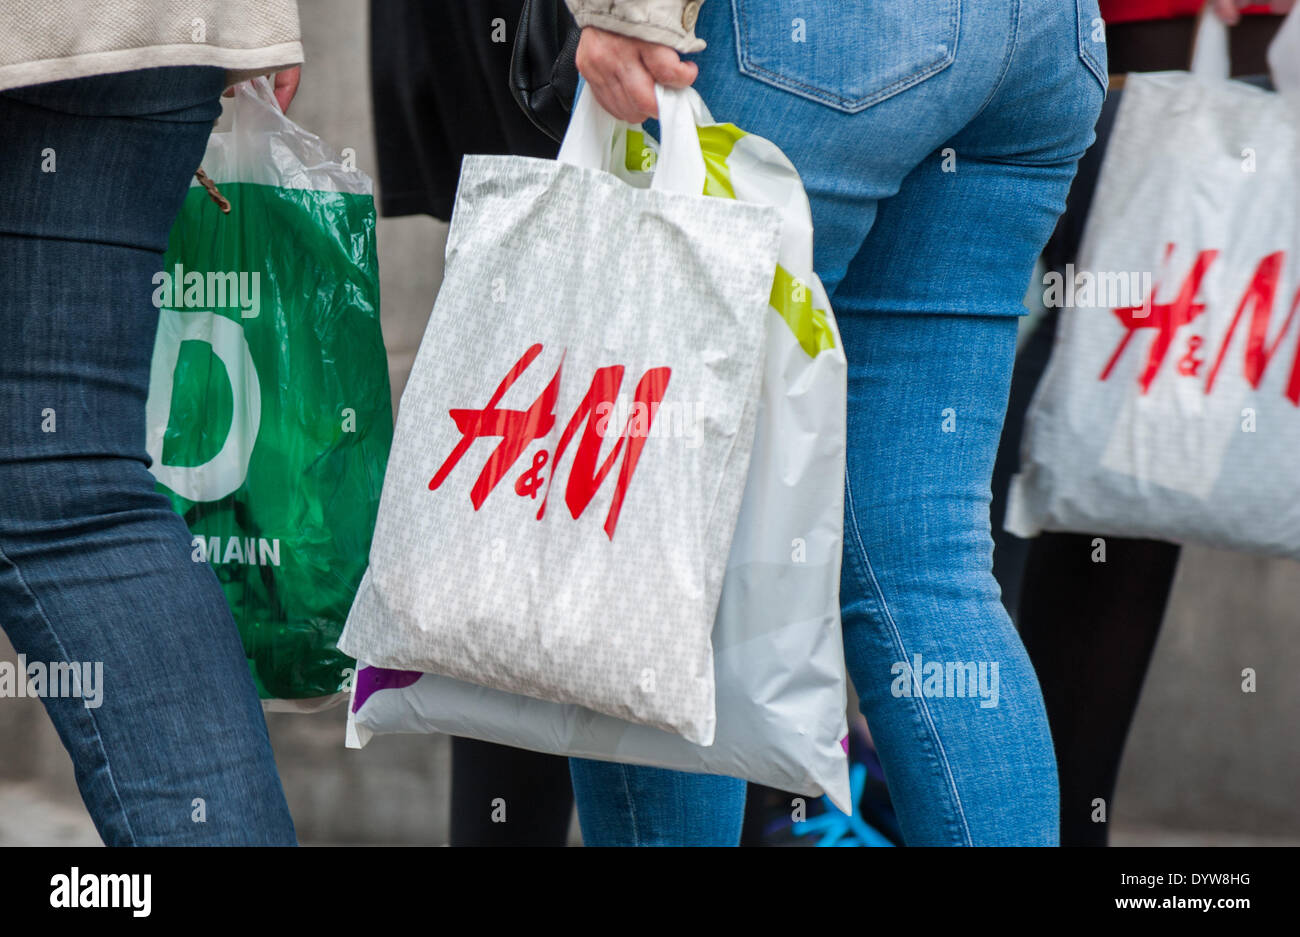 People hold plastic bags of the retail clothing company Hennes & Mauritz ( H&M) in Berlin, Germany, 23 April 2014. Photo: Hauke-Christian Dittrich/dpa  Stock Photo - Alamy